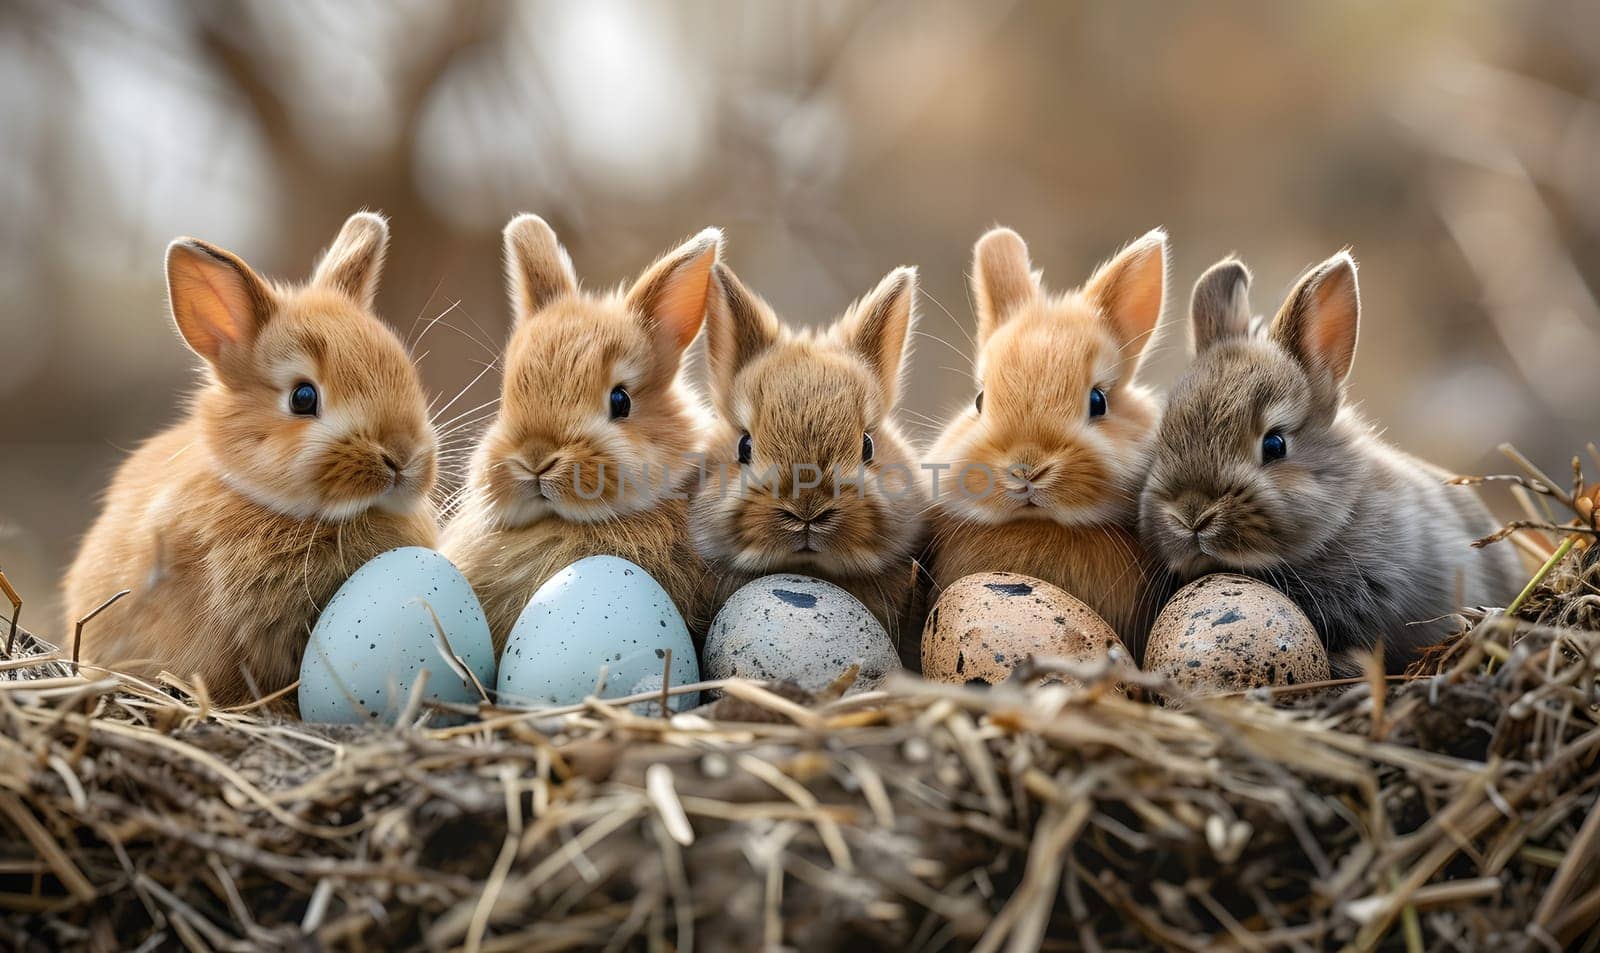 A group of baby rabbits, also known as leverets, sitting in a nest with eggs. This wildlife event showcases the terrestrial animals in their natural habitat, surrounded by grass and natural materials